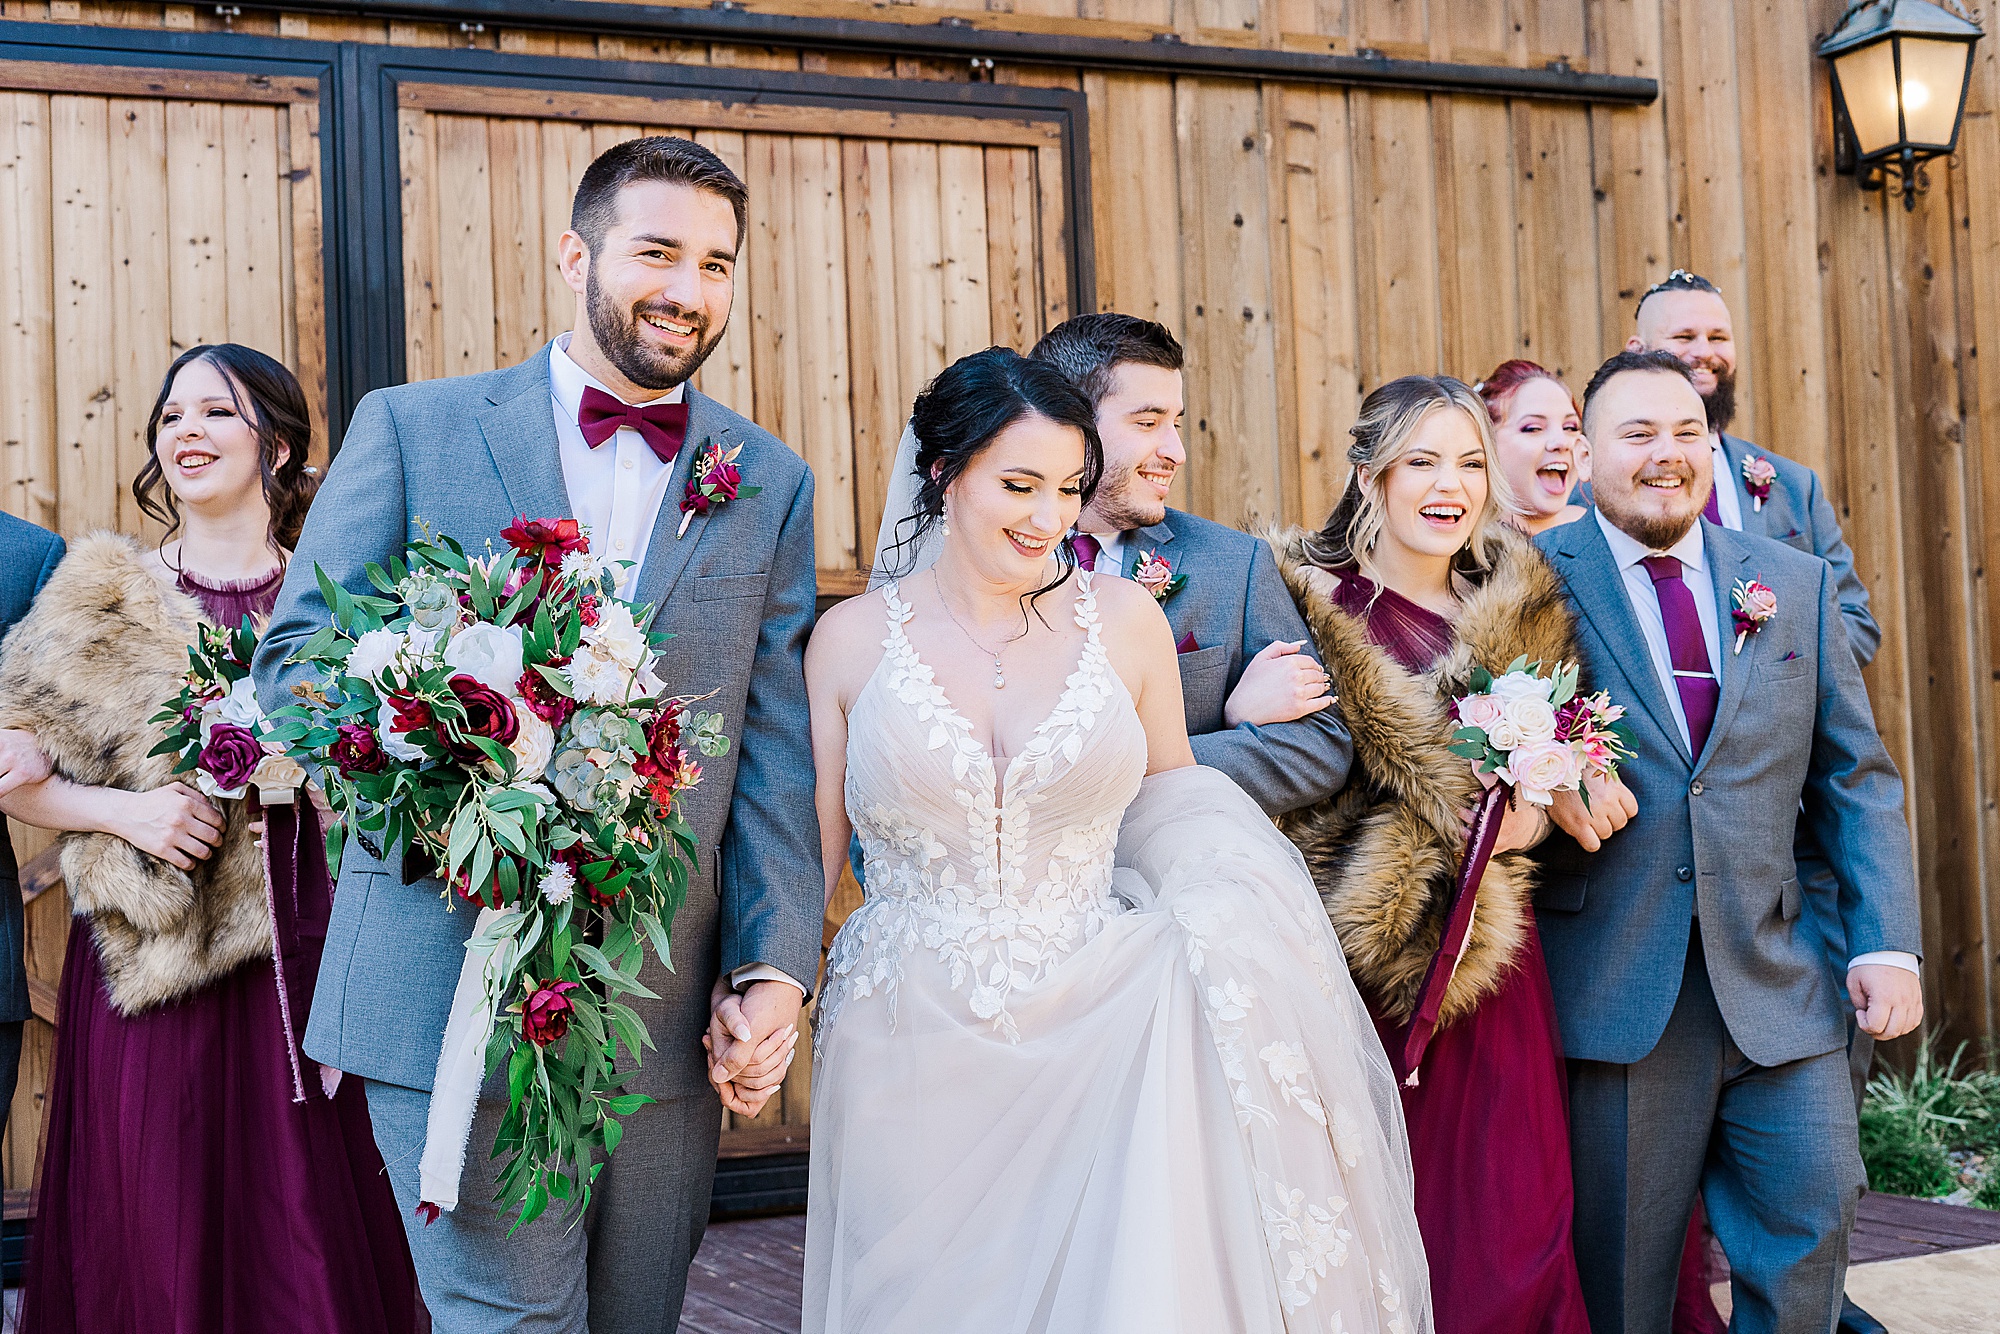 groom holds bride's bouquet during portraits with their wedding party